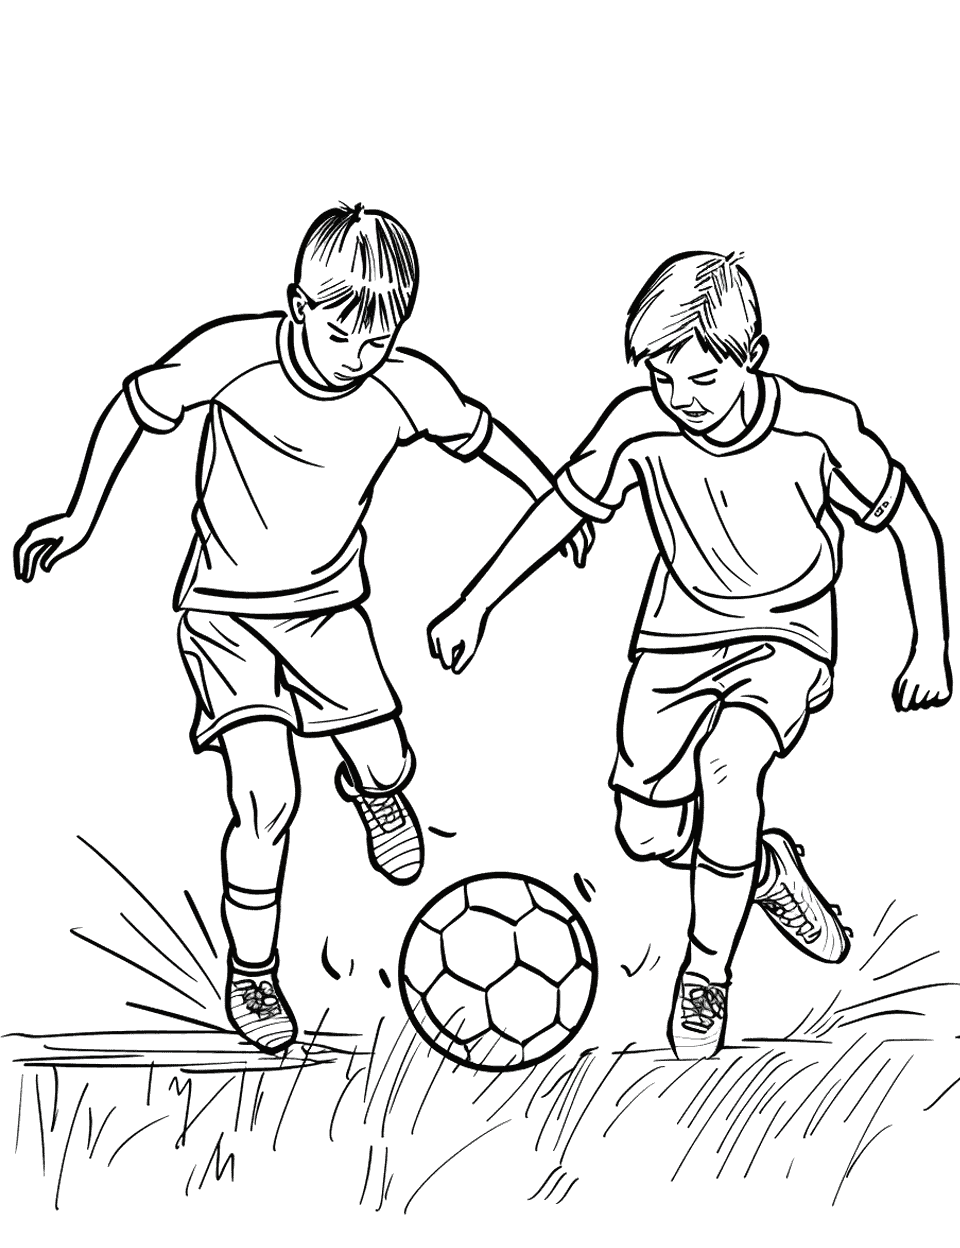 Soccer Practice Drills Coloring Page - Kids engaging in soccer practice drills, focusing on passing and teamwork.